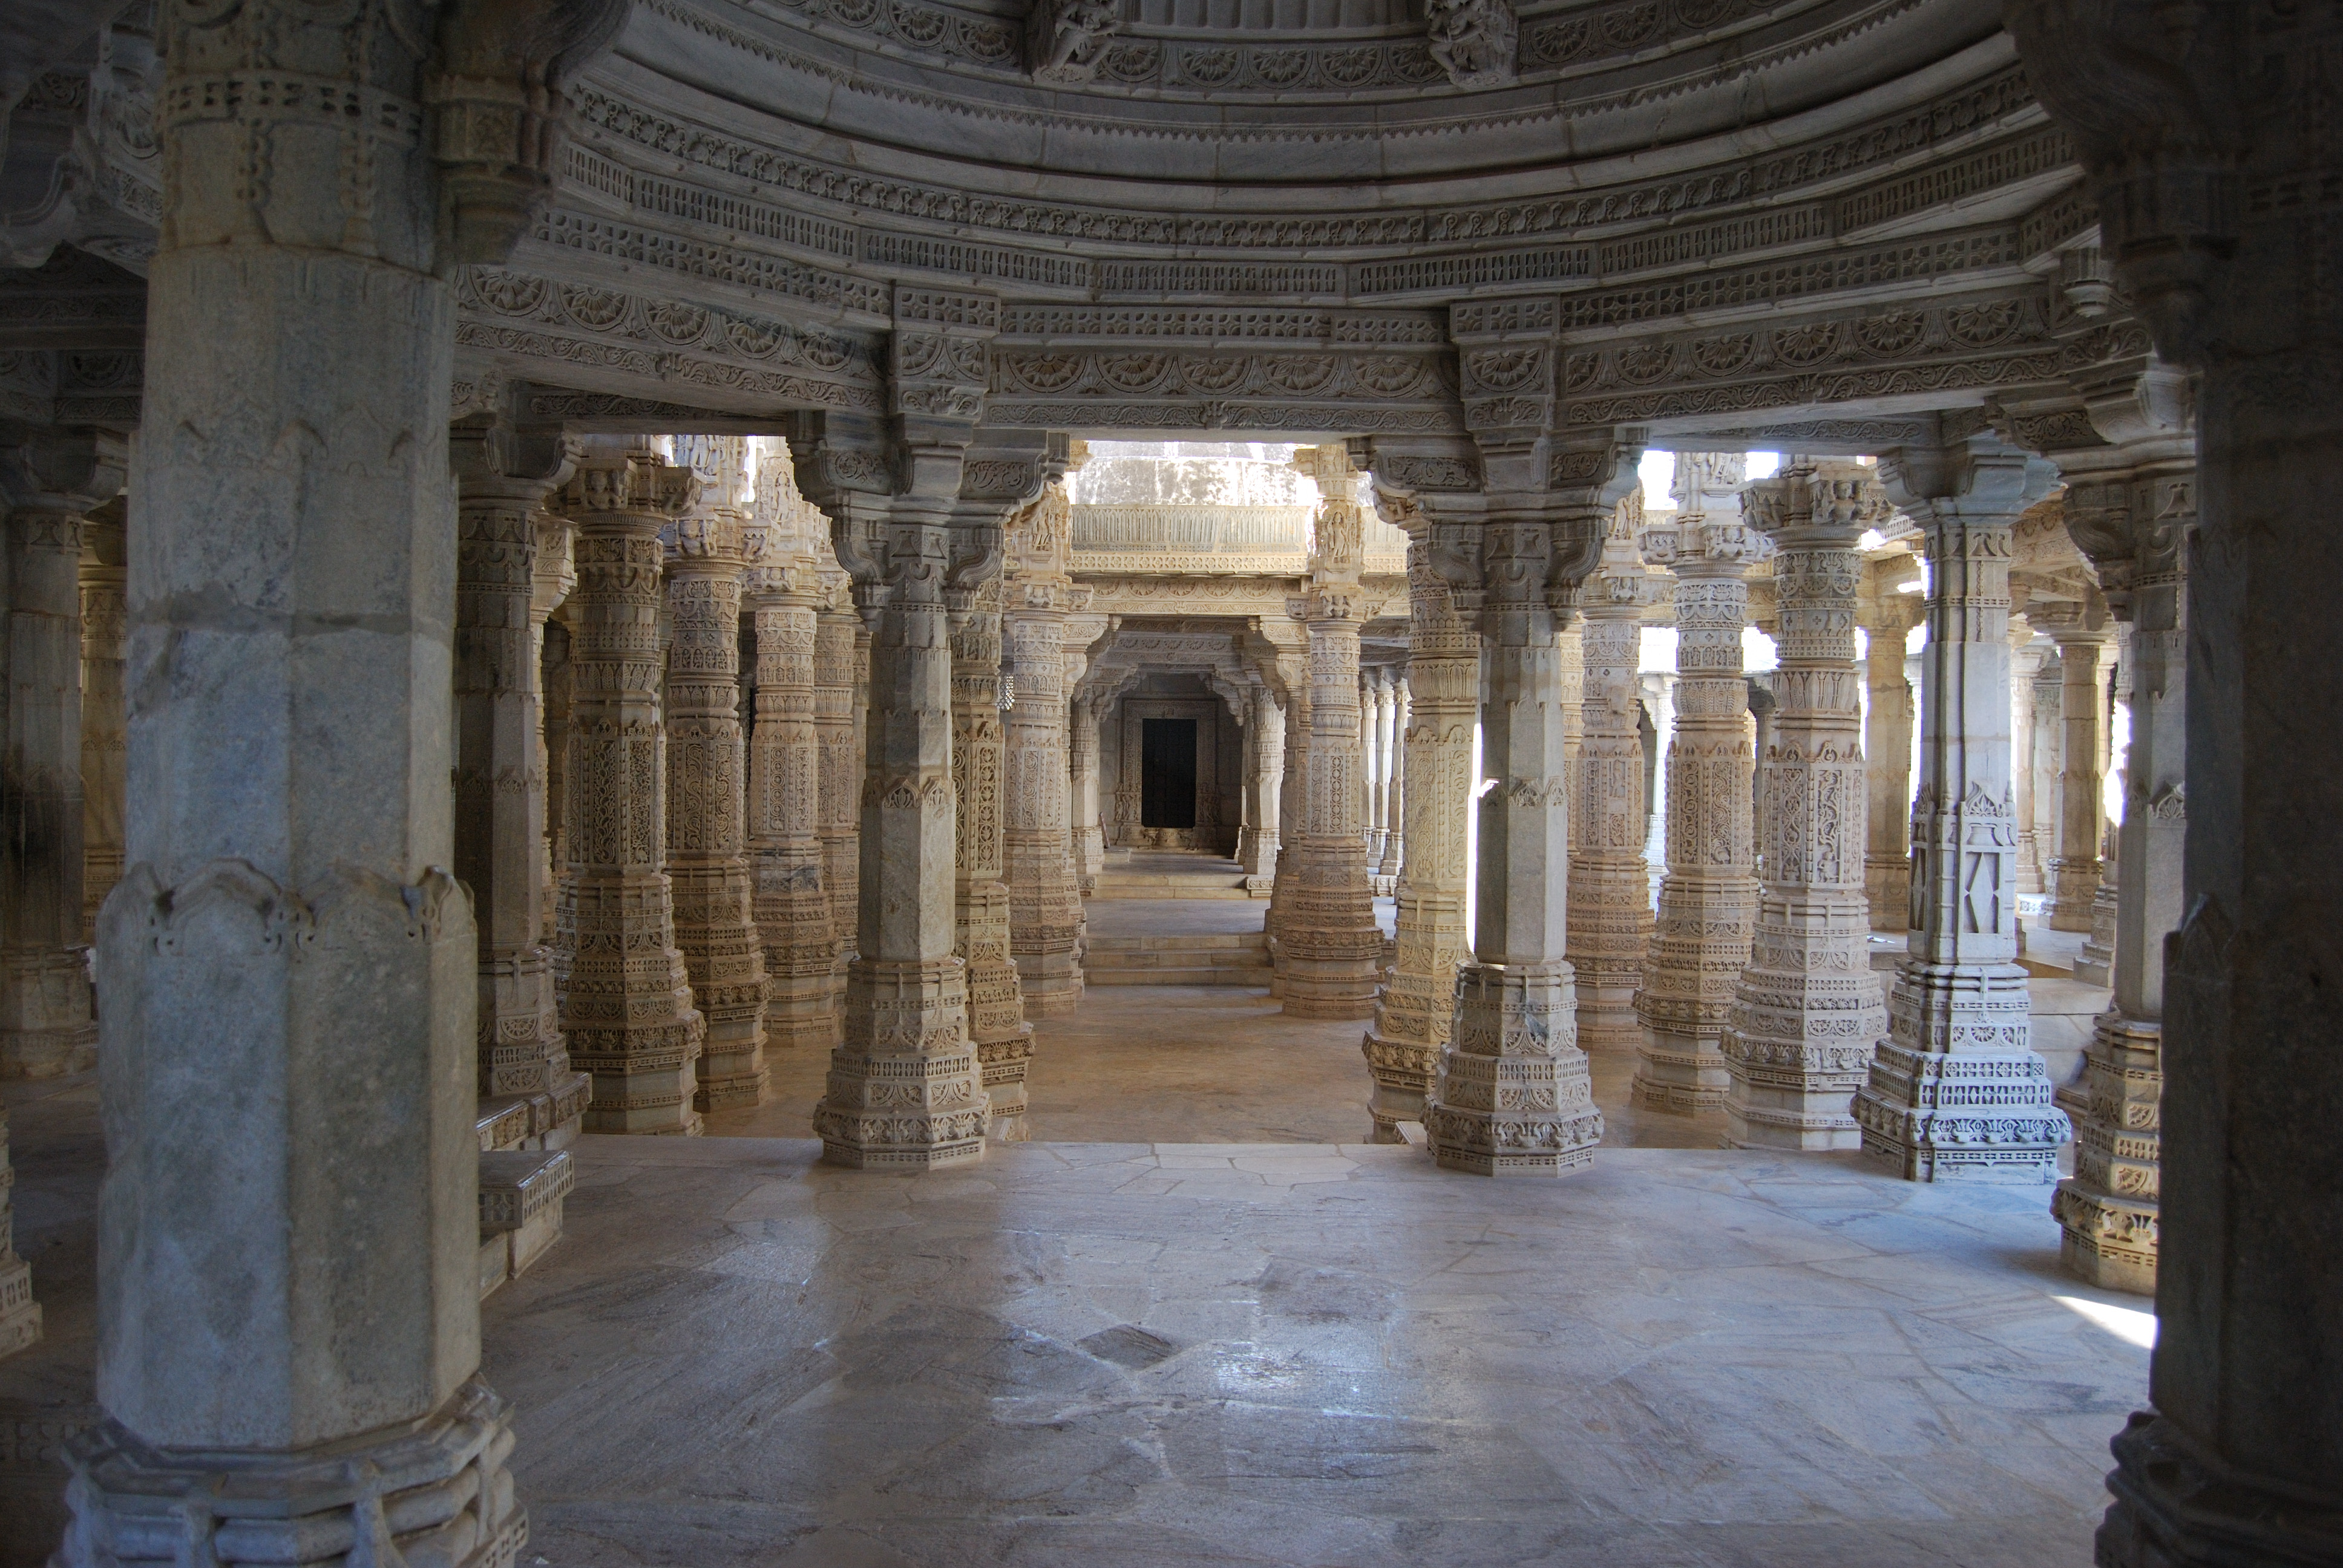 inside temples - Google Search | Places I want to visit or move to ...